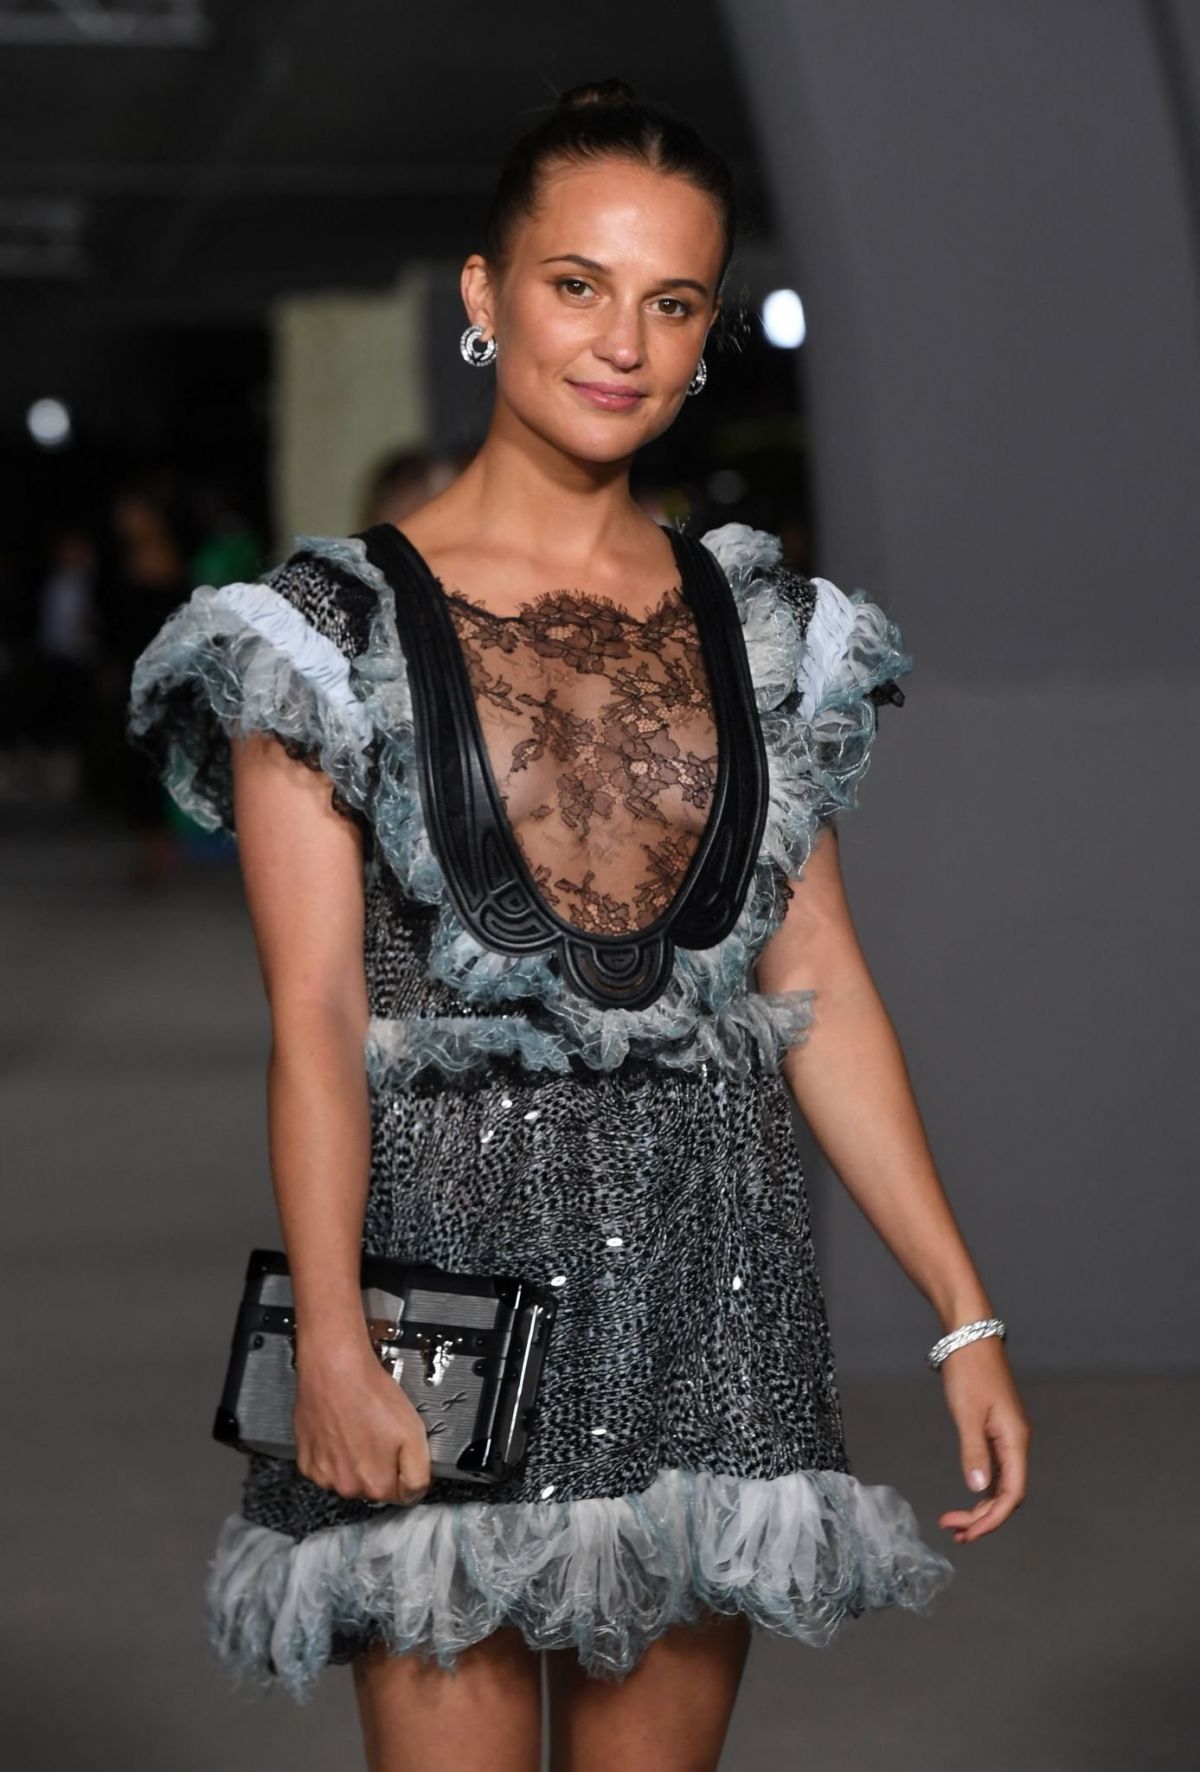 Alicia Vikander at the Met Gala Afterparty, The Met Gala Afterparty Had  Its Own Unofficial Theme: Glitz and Glam